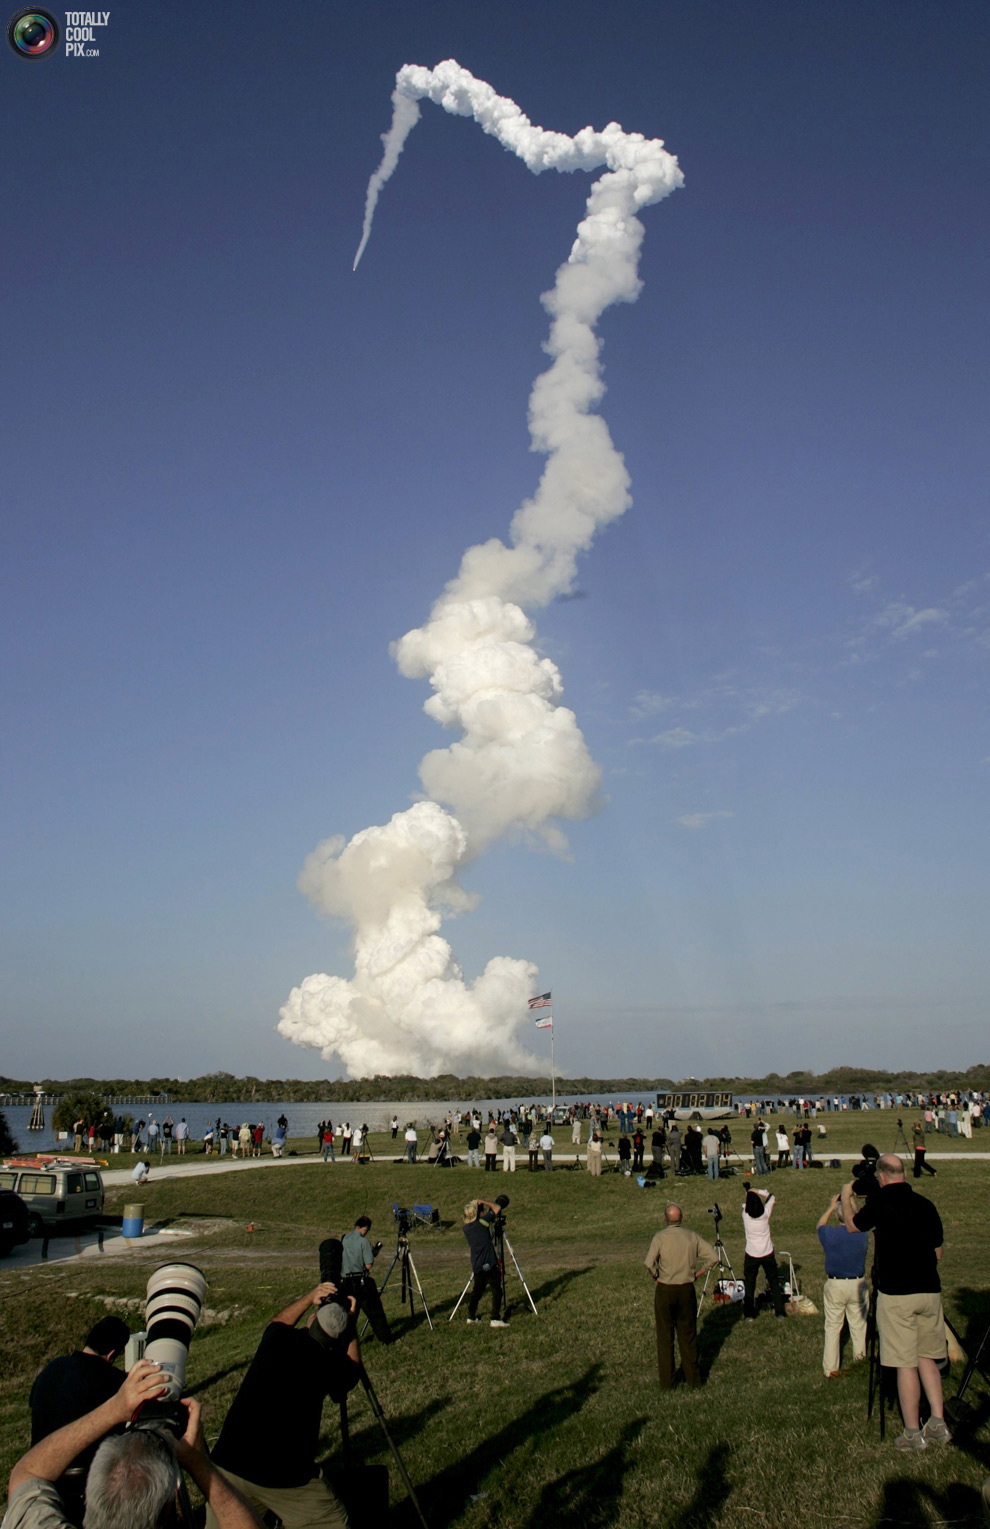 Space Shuttle Discovery's Last Flight